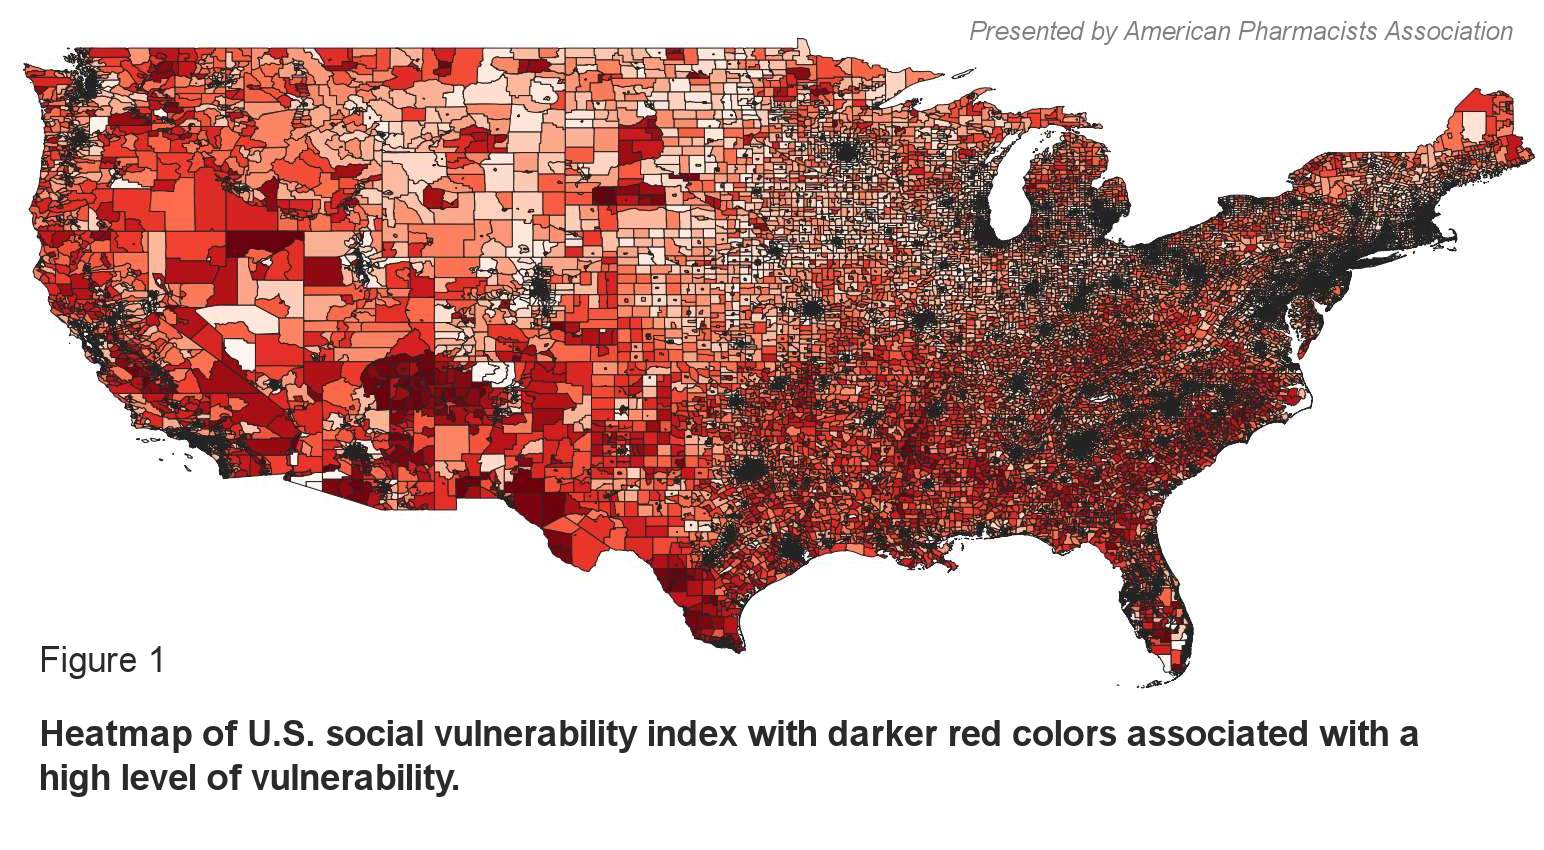 Figure 1: Heatmap of U.S. social vulnerability index with darker red colors associated with a high level of vulnerability.